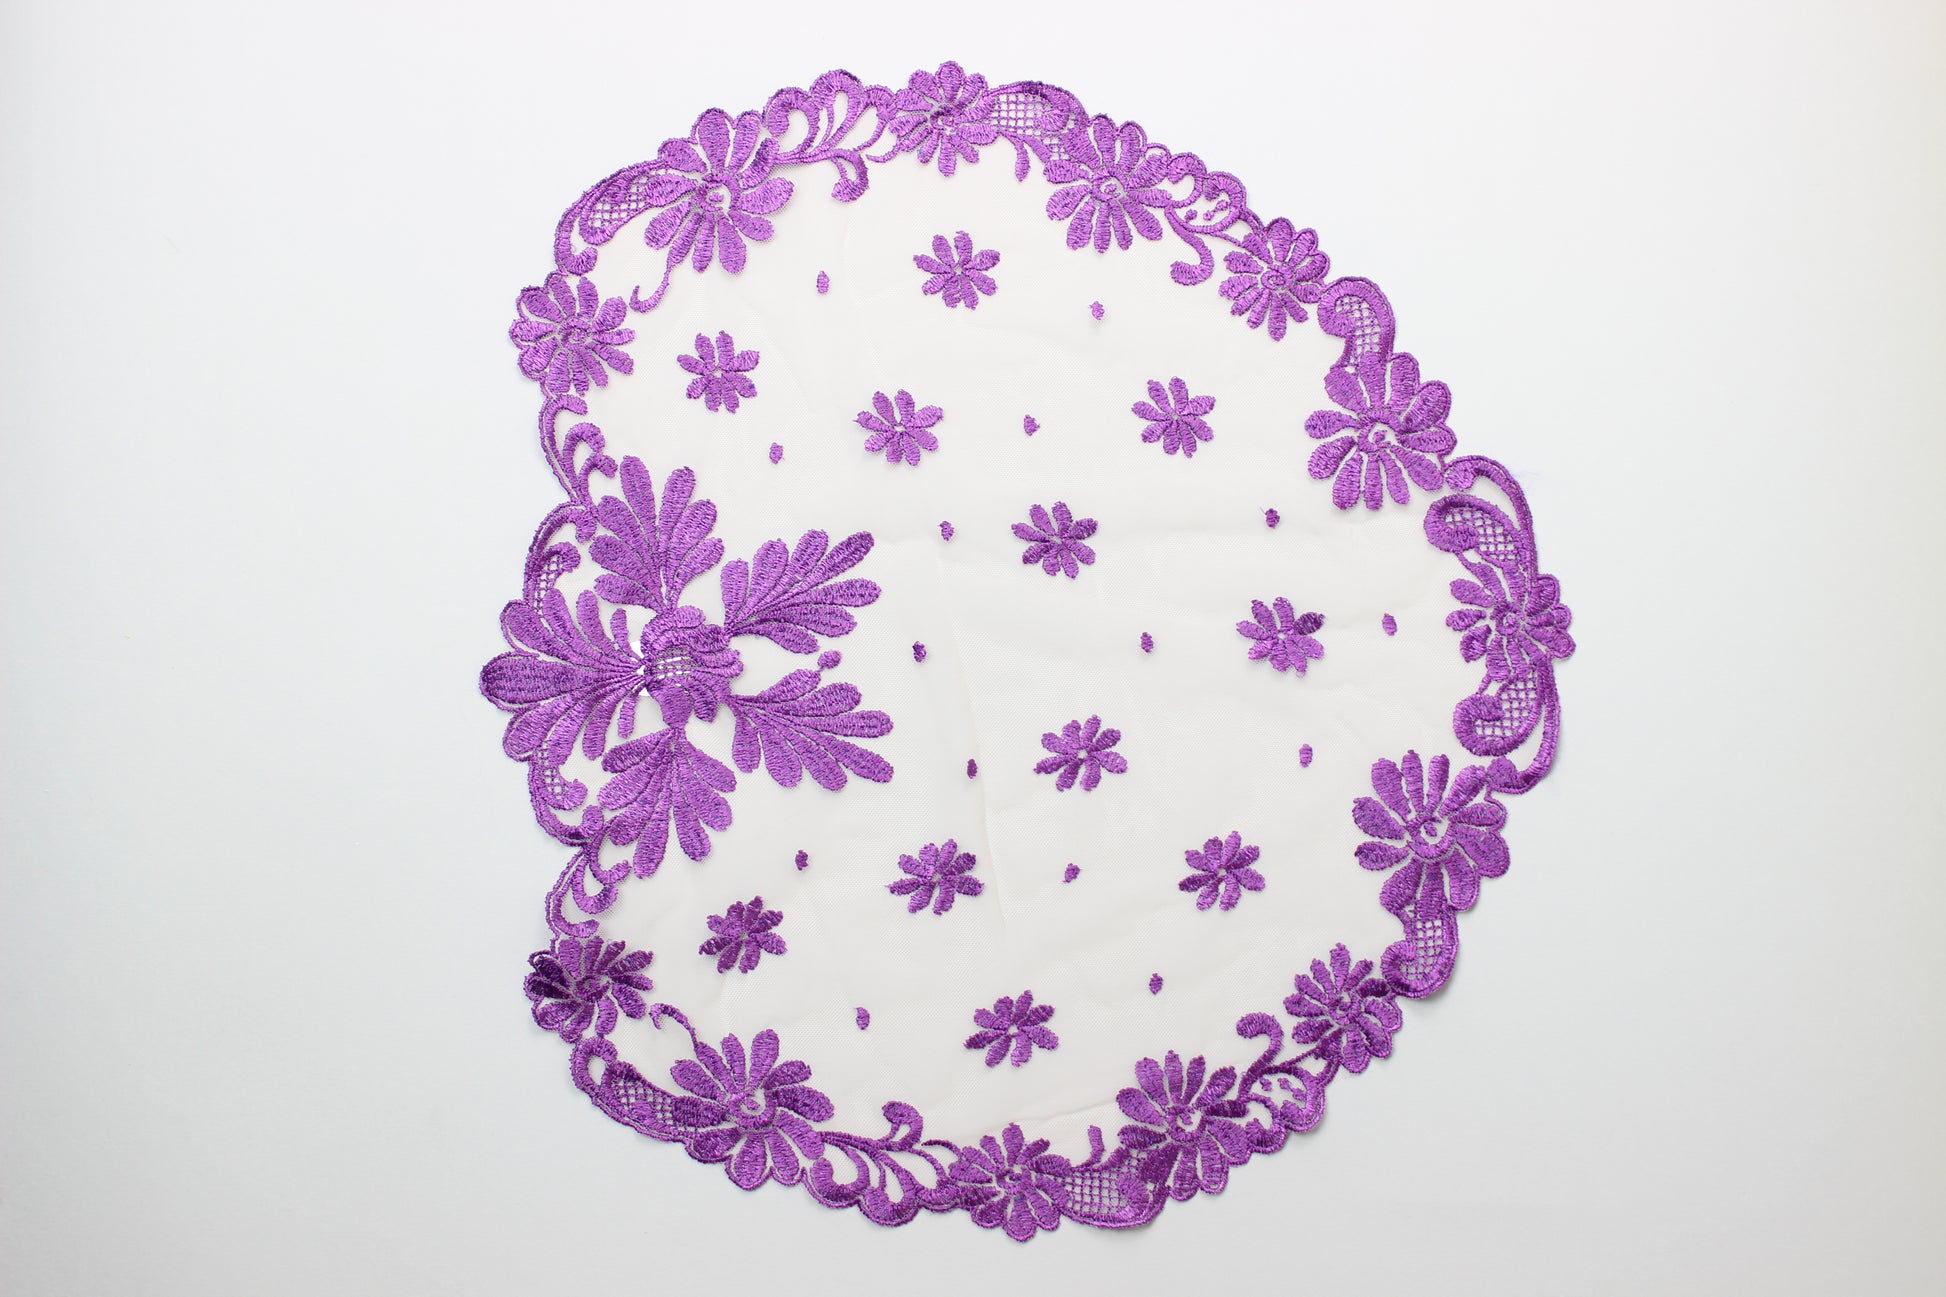 NEW!! Bestseller veil in new purple color - MariaVeils